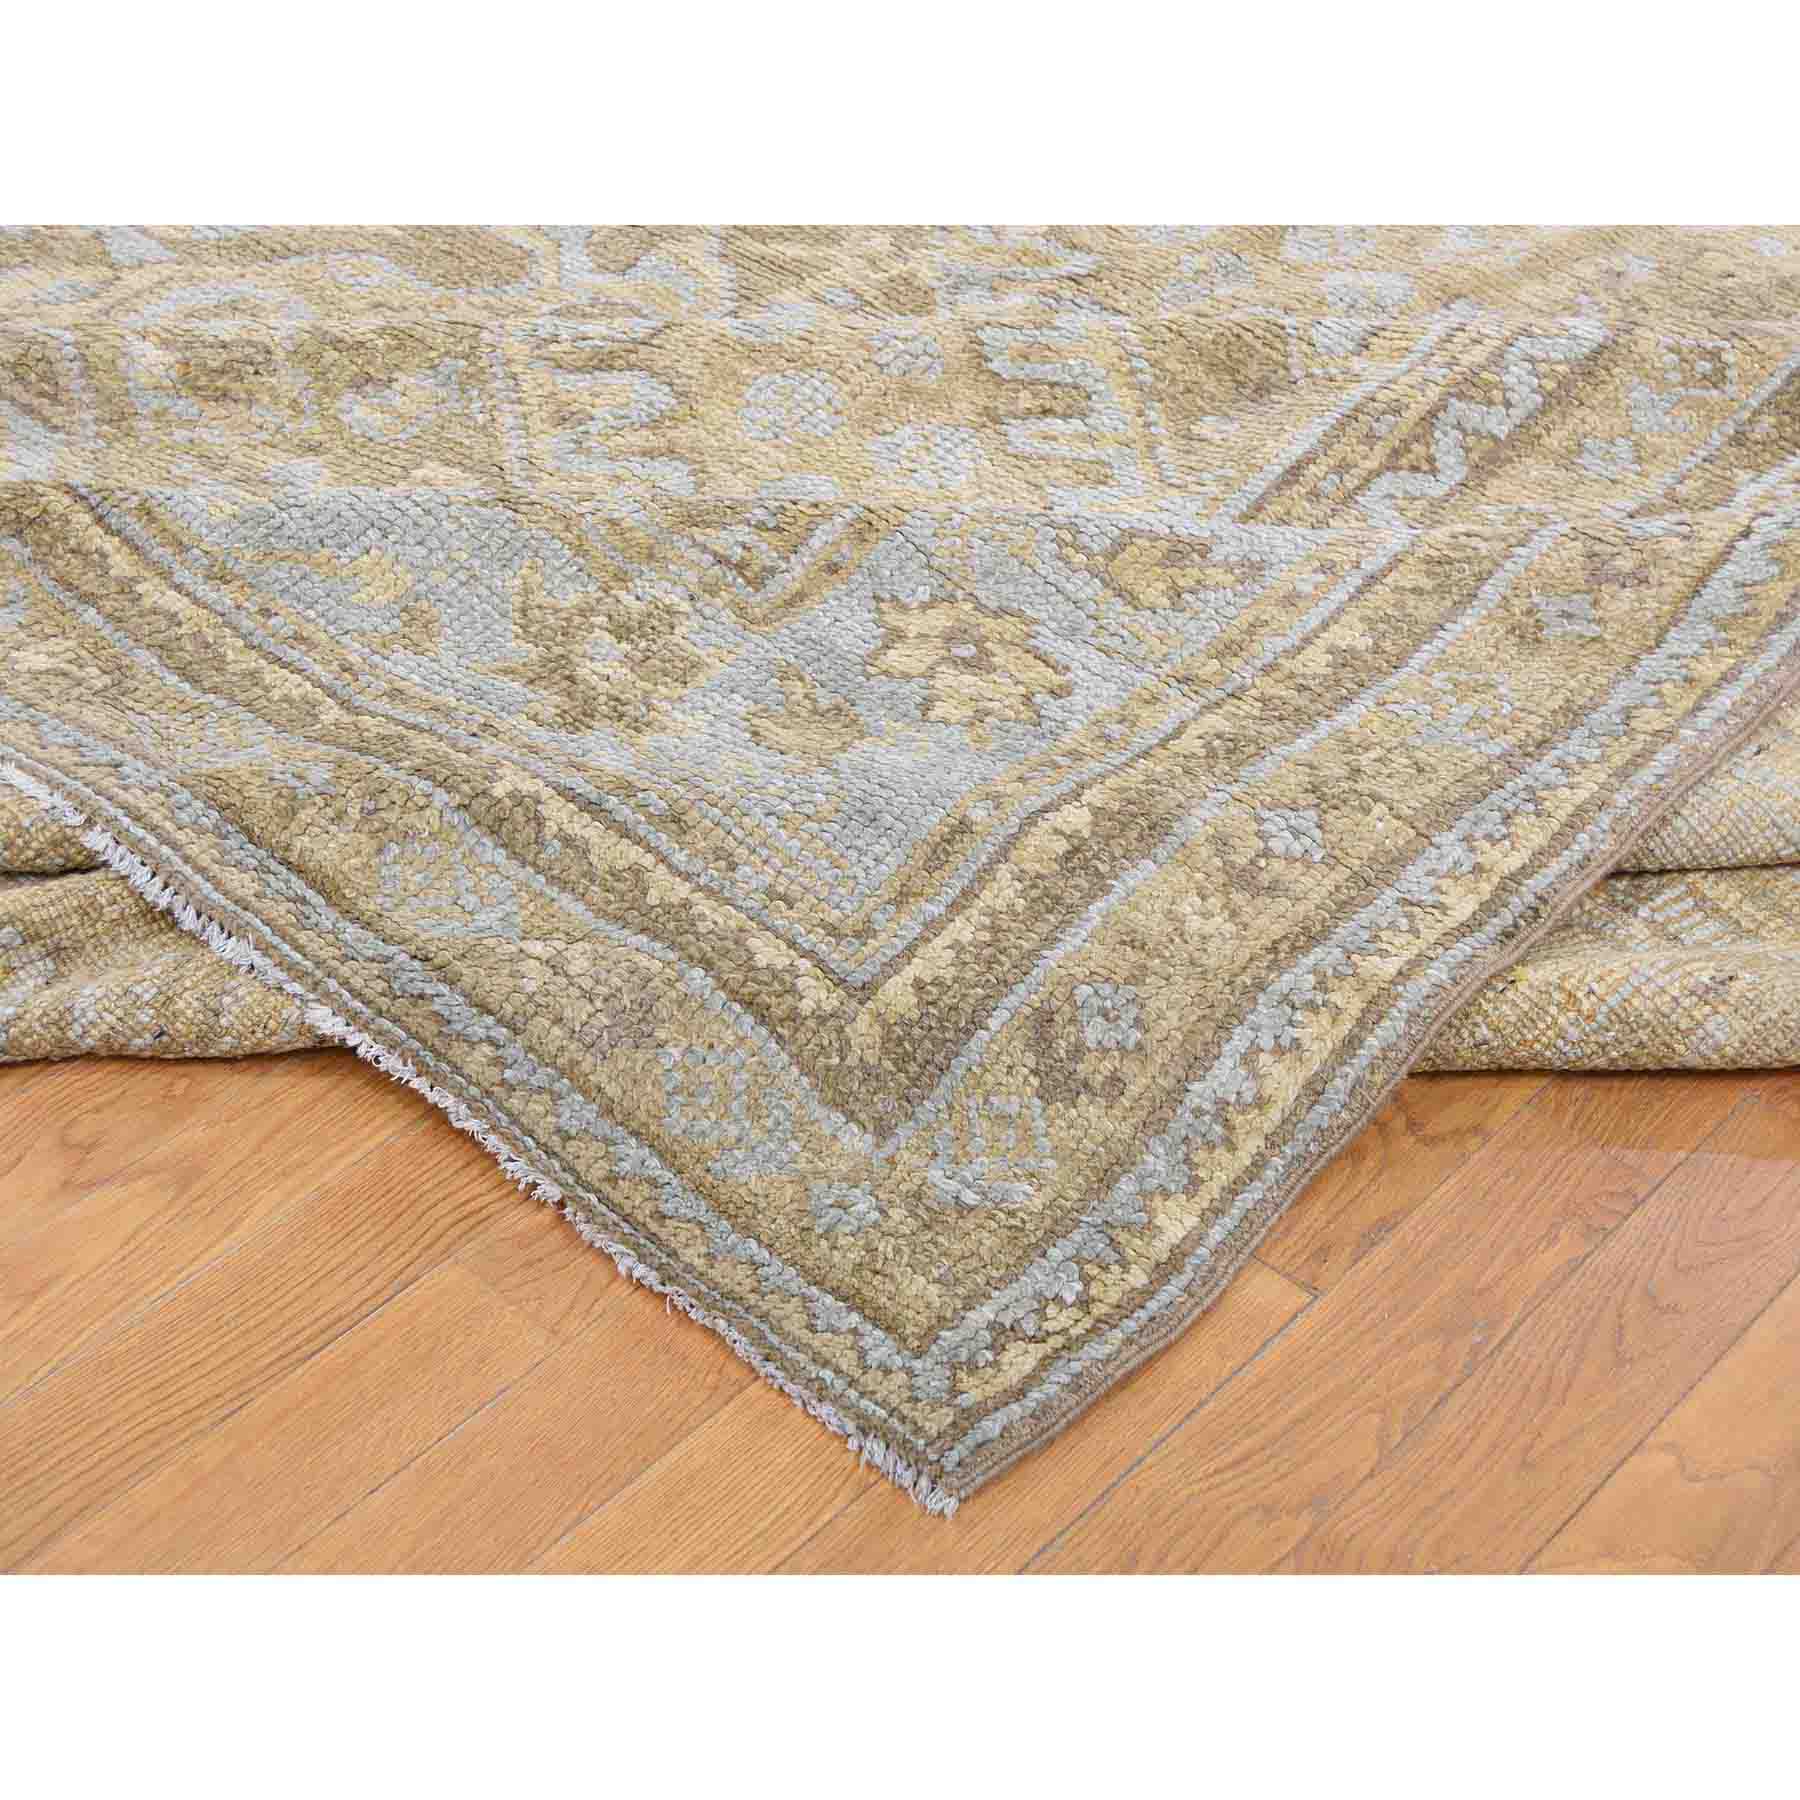 Antique-Hand-Knotted-Rug-195310